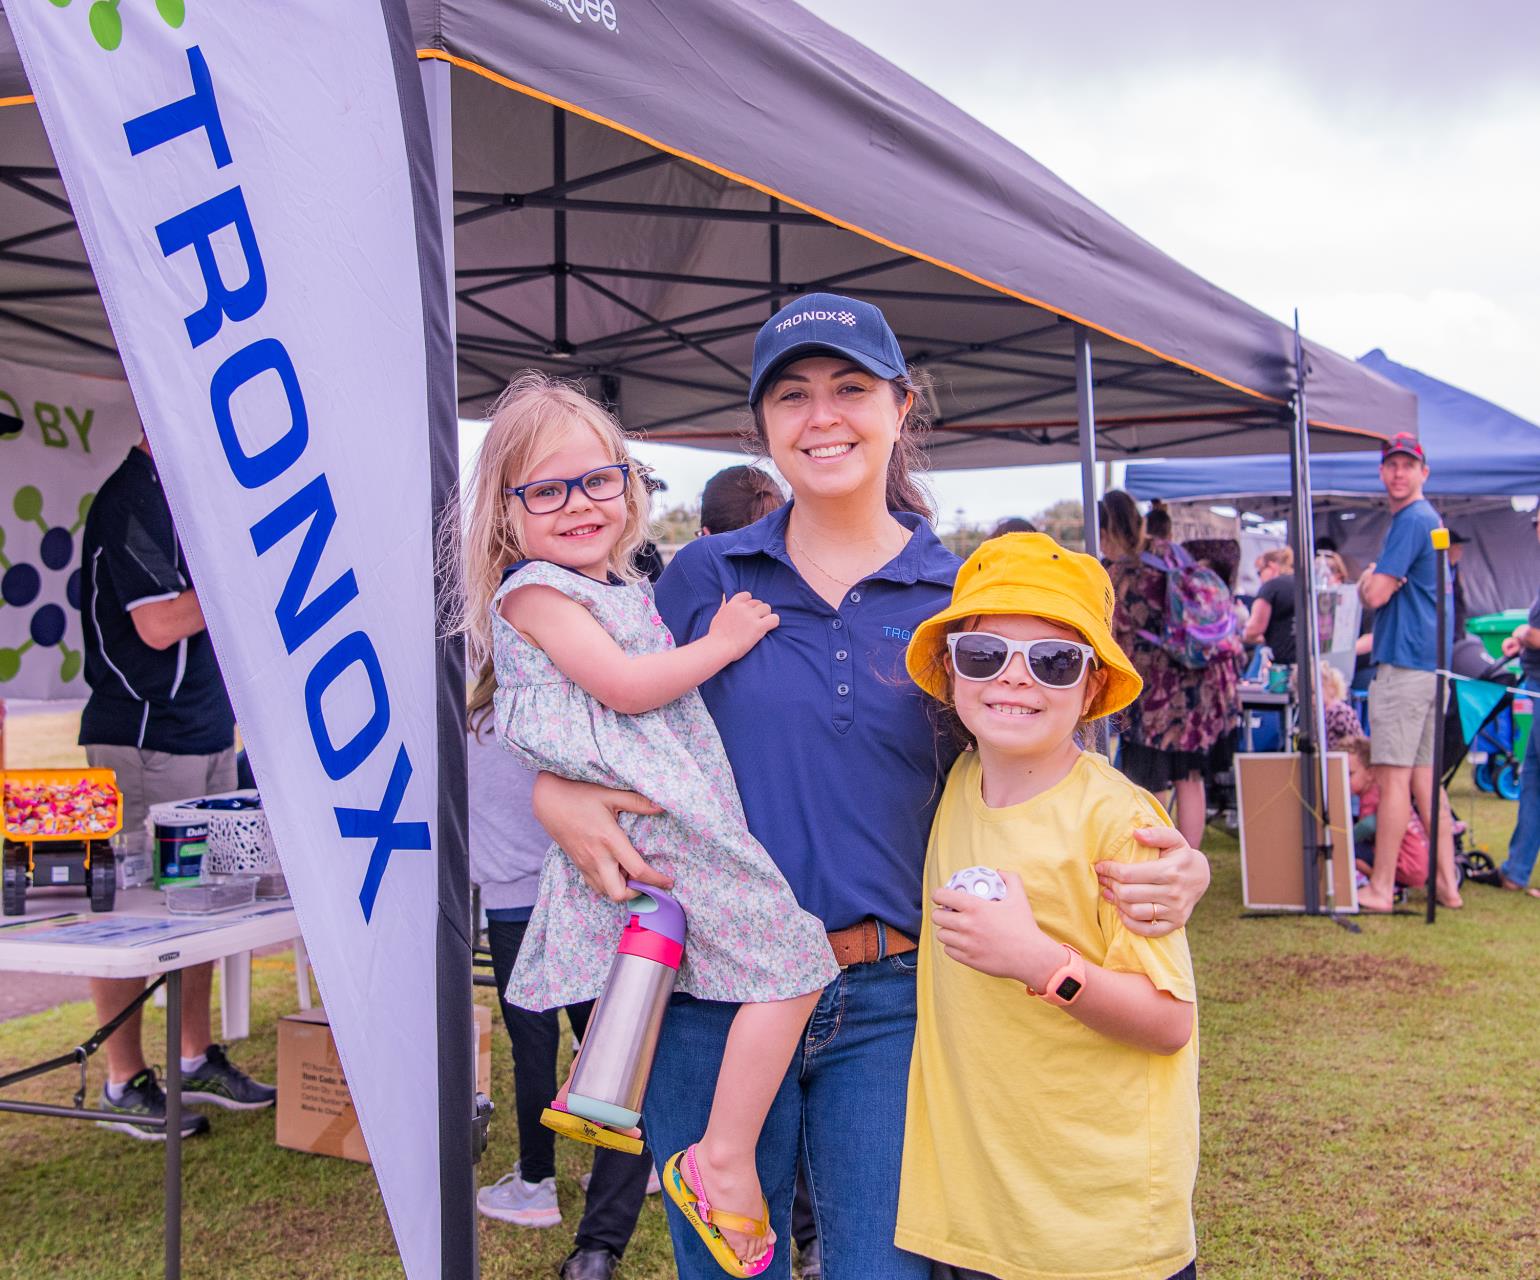 Attending yesterday’s Tronox Spring out are (from left) Taylor (3), Holly and Myla Hastie (9).